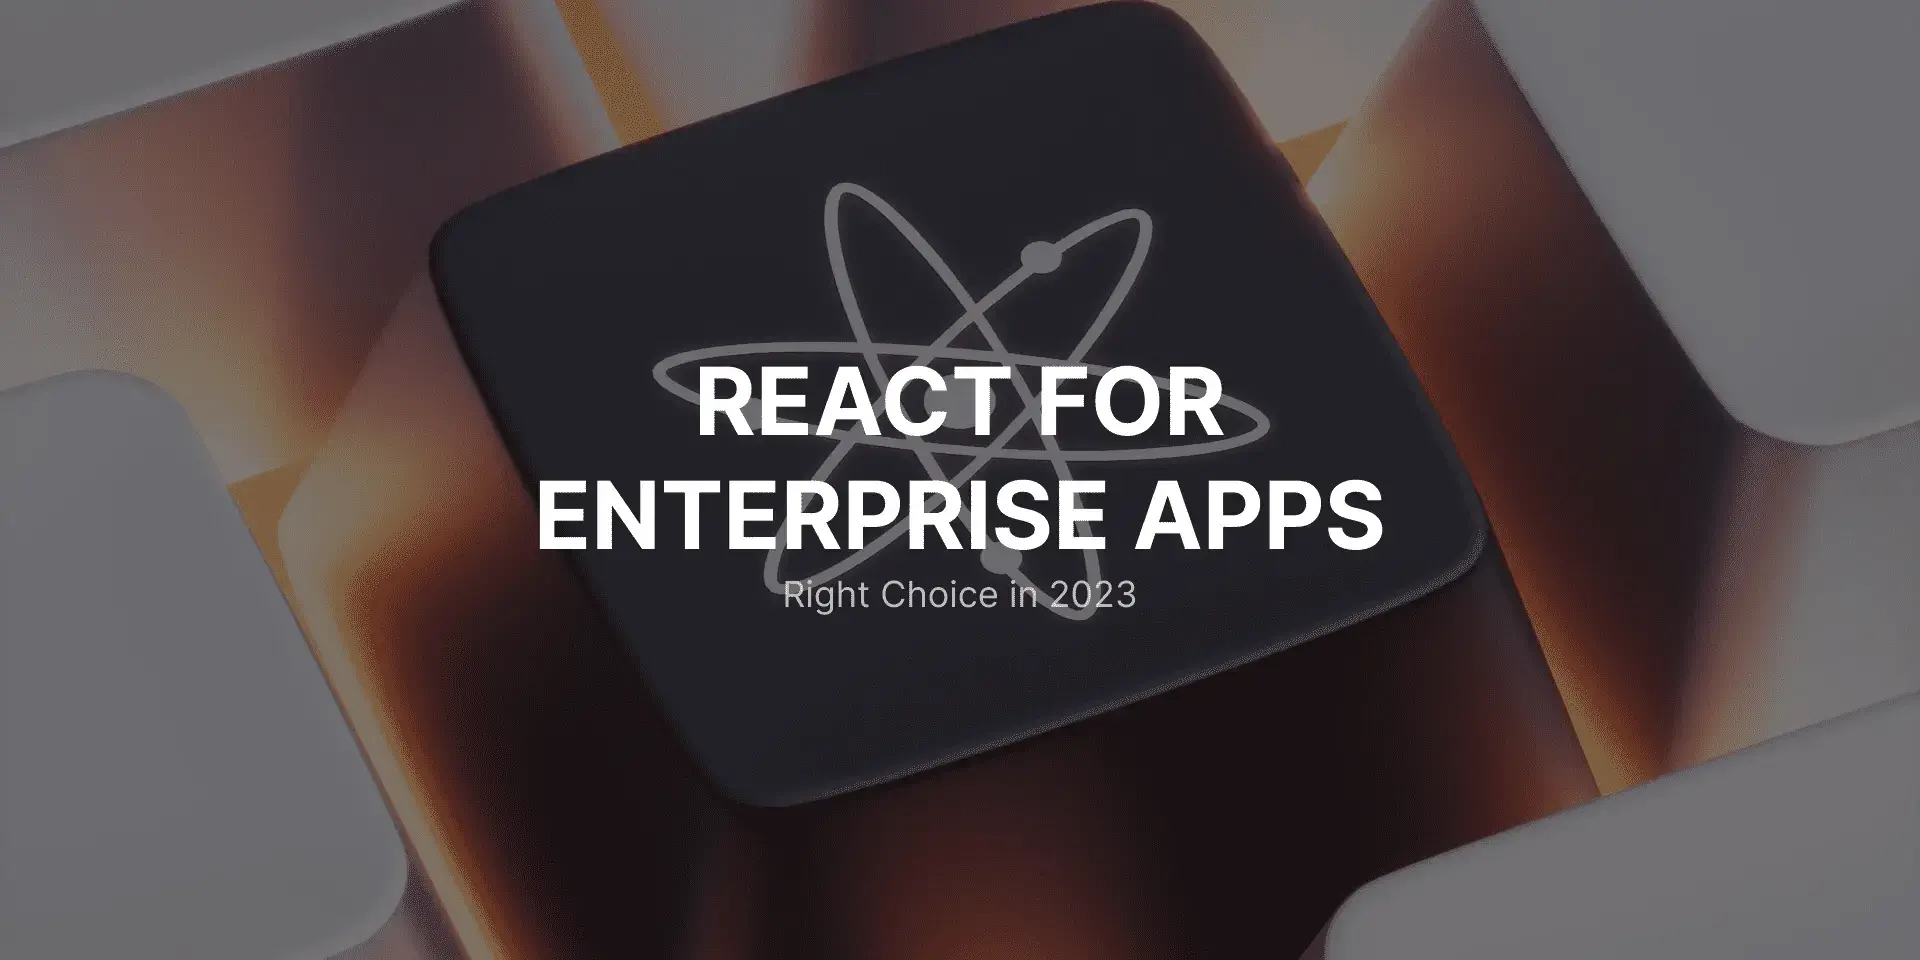 React for Enterprise Apps: Is it the Right Choice in 2023?